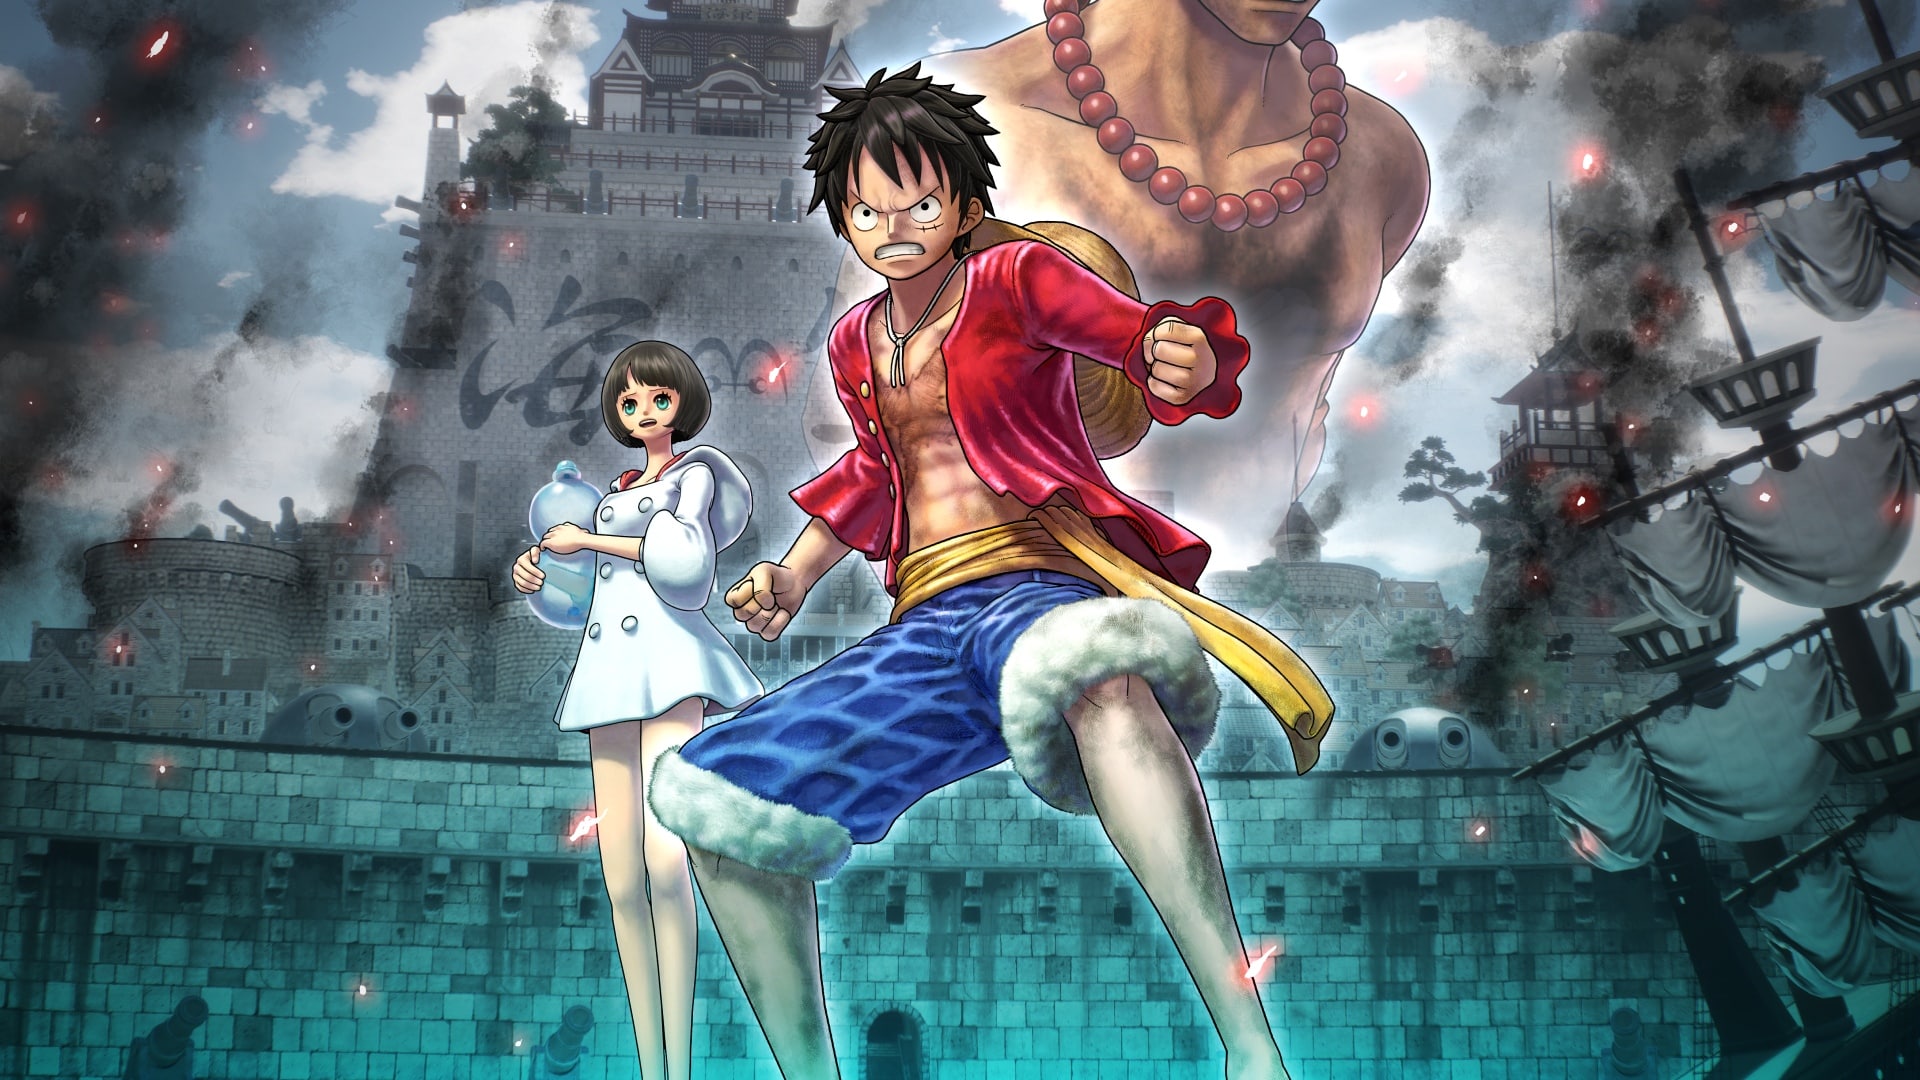 One Piece: After 25 years, beloved Japanese manga 'One Piece